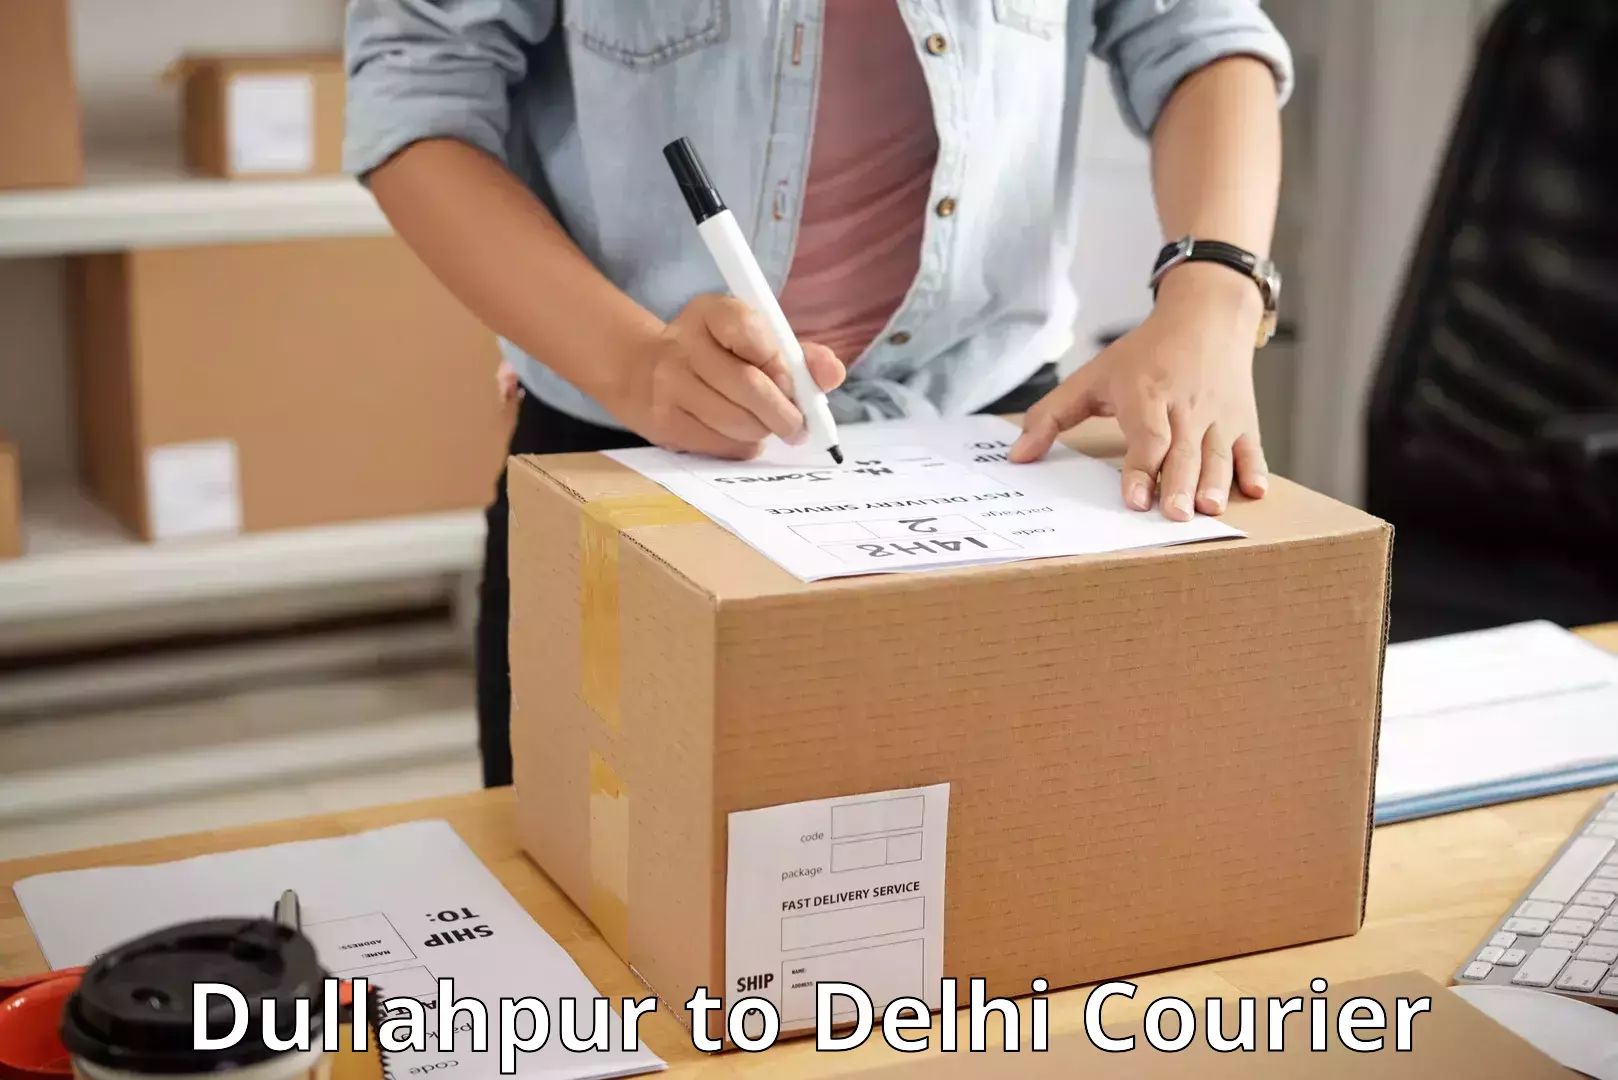 Reliable logistics providers Dullahpur to NCR